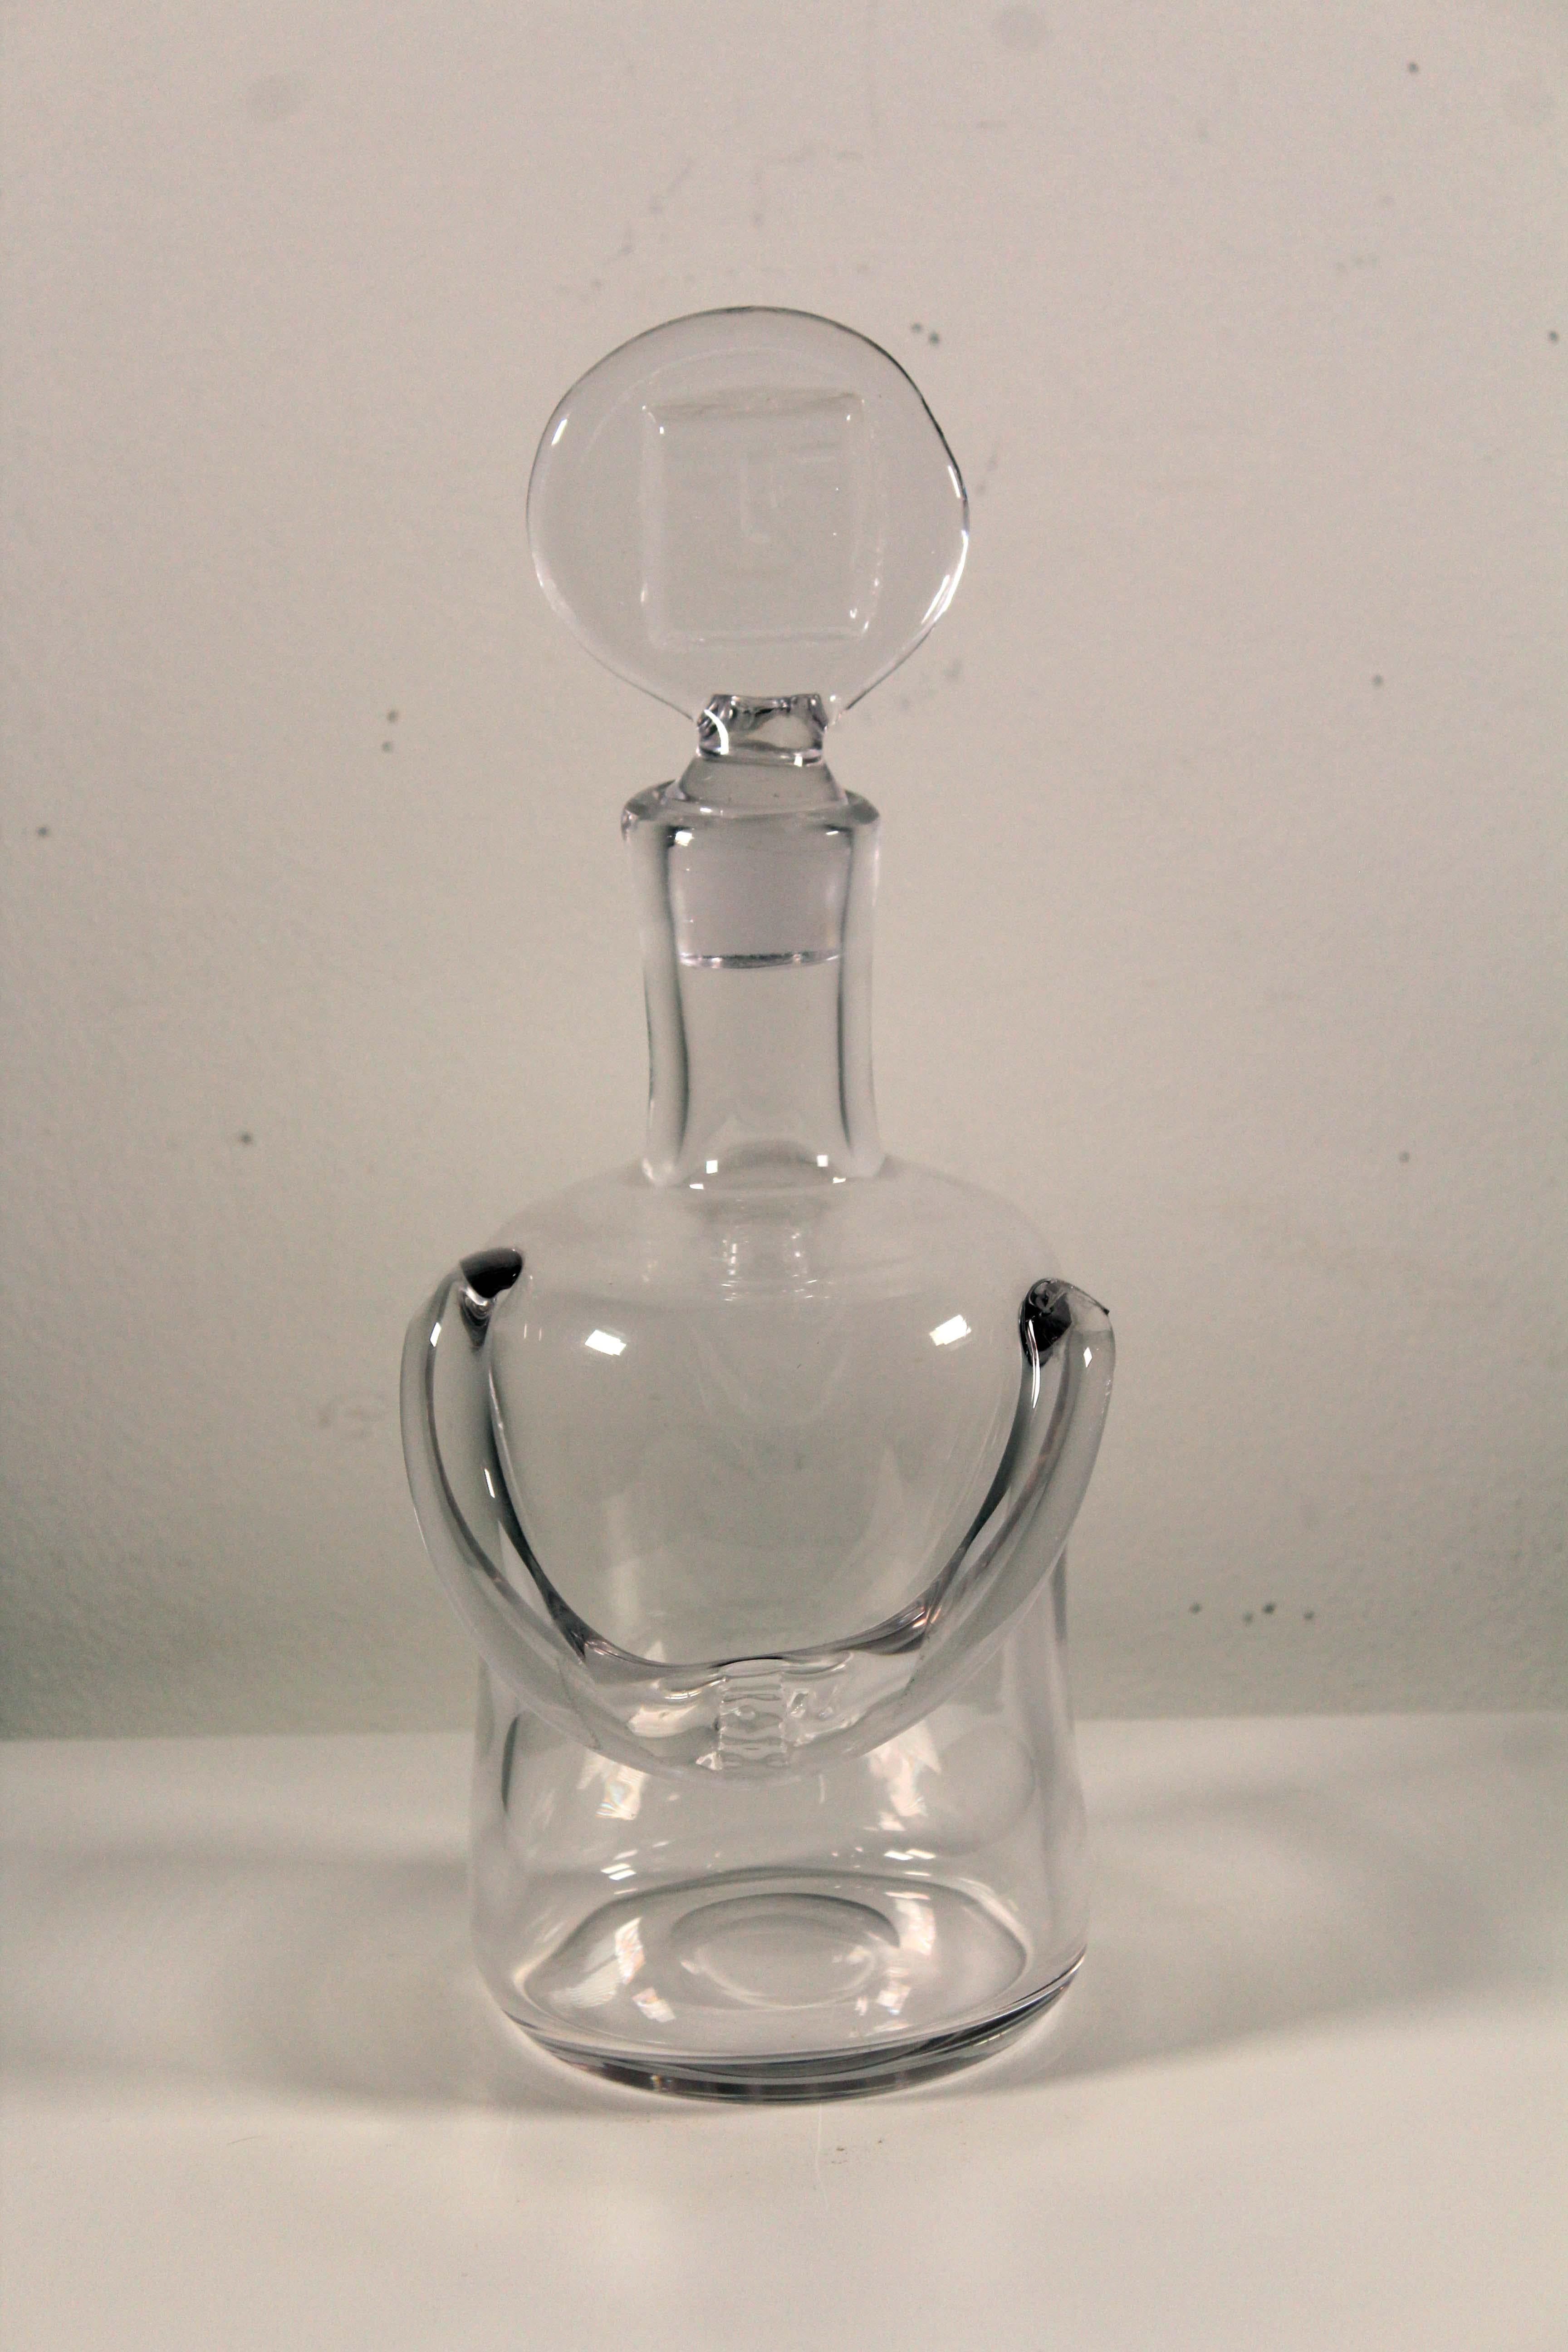 An iconic Mid-Century Modern clear glass decanter by Swedish artist Erik Hoglund. The lid of the bottle has his infamous male face design. Etched on bottom H. / 346 / 65. From a private collection. Dimensions: 11.5” height x 4.5” diameter. In very